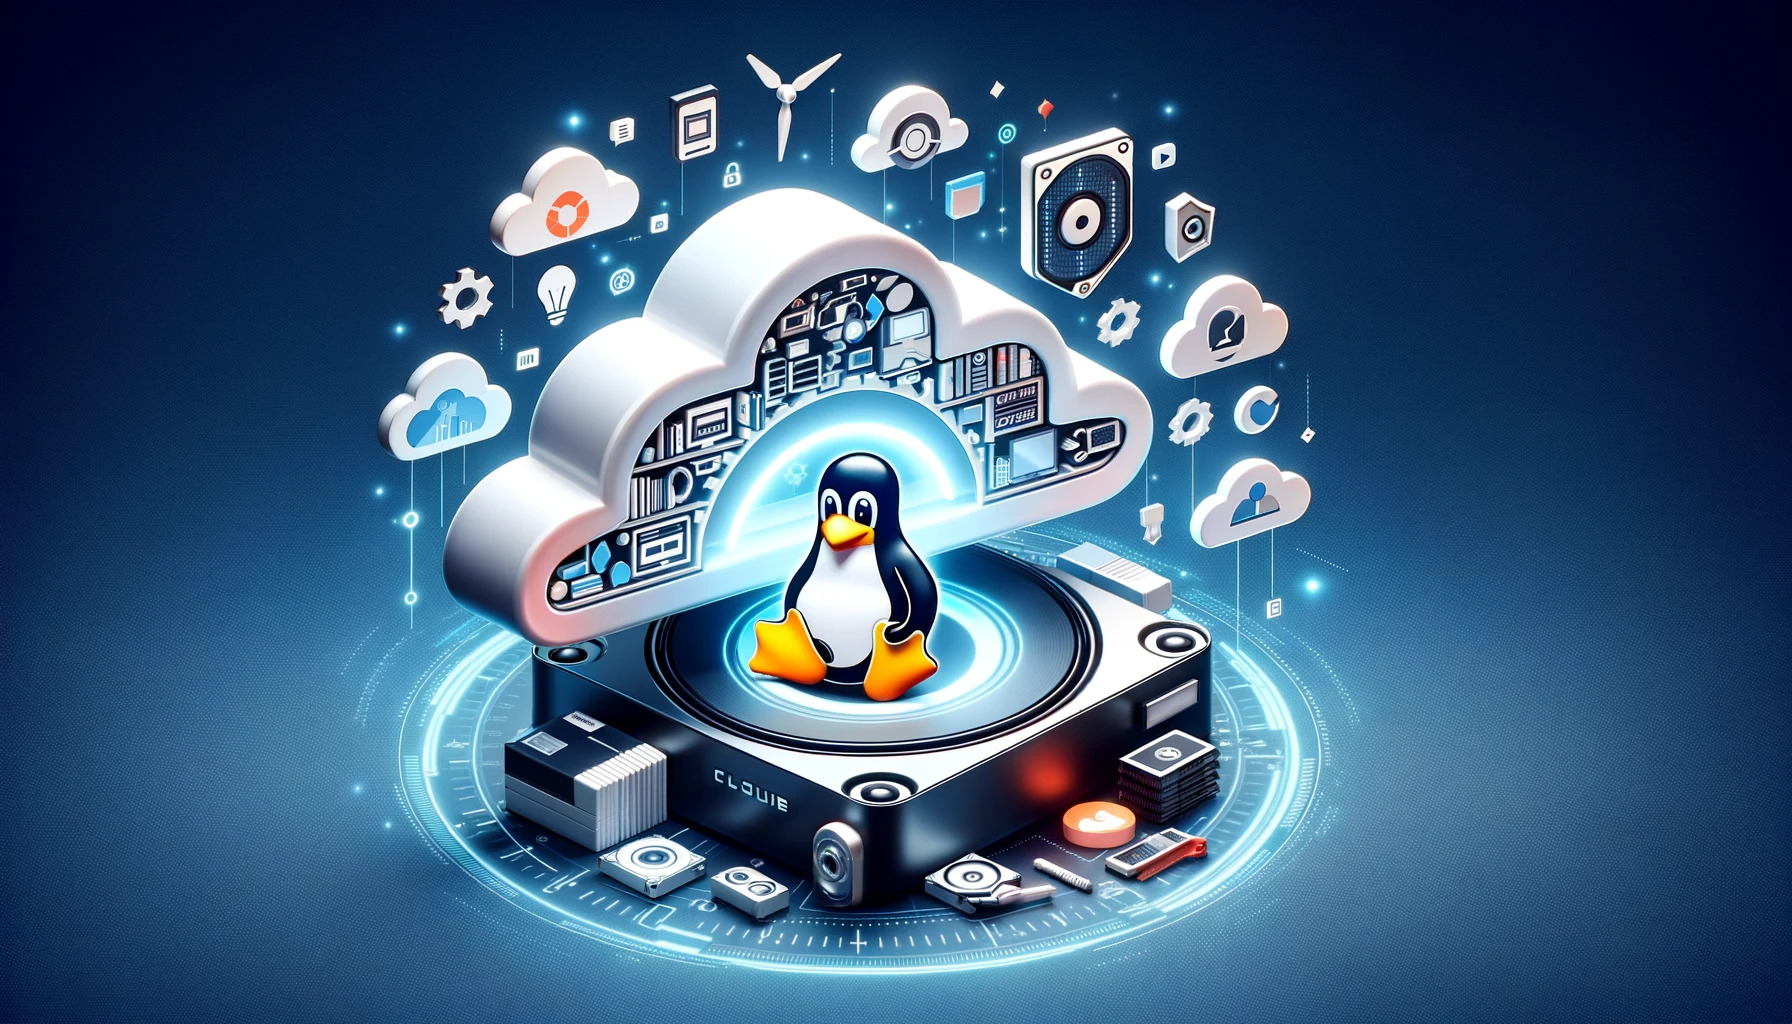 concept of cloud technology, data backup, and the Linux operating system